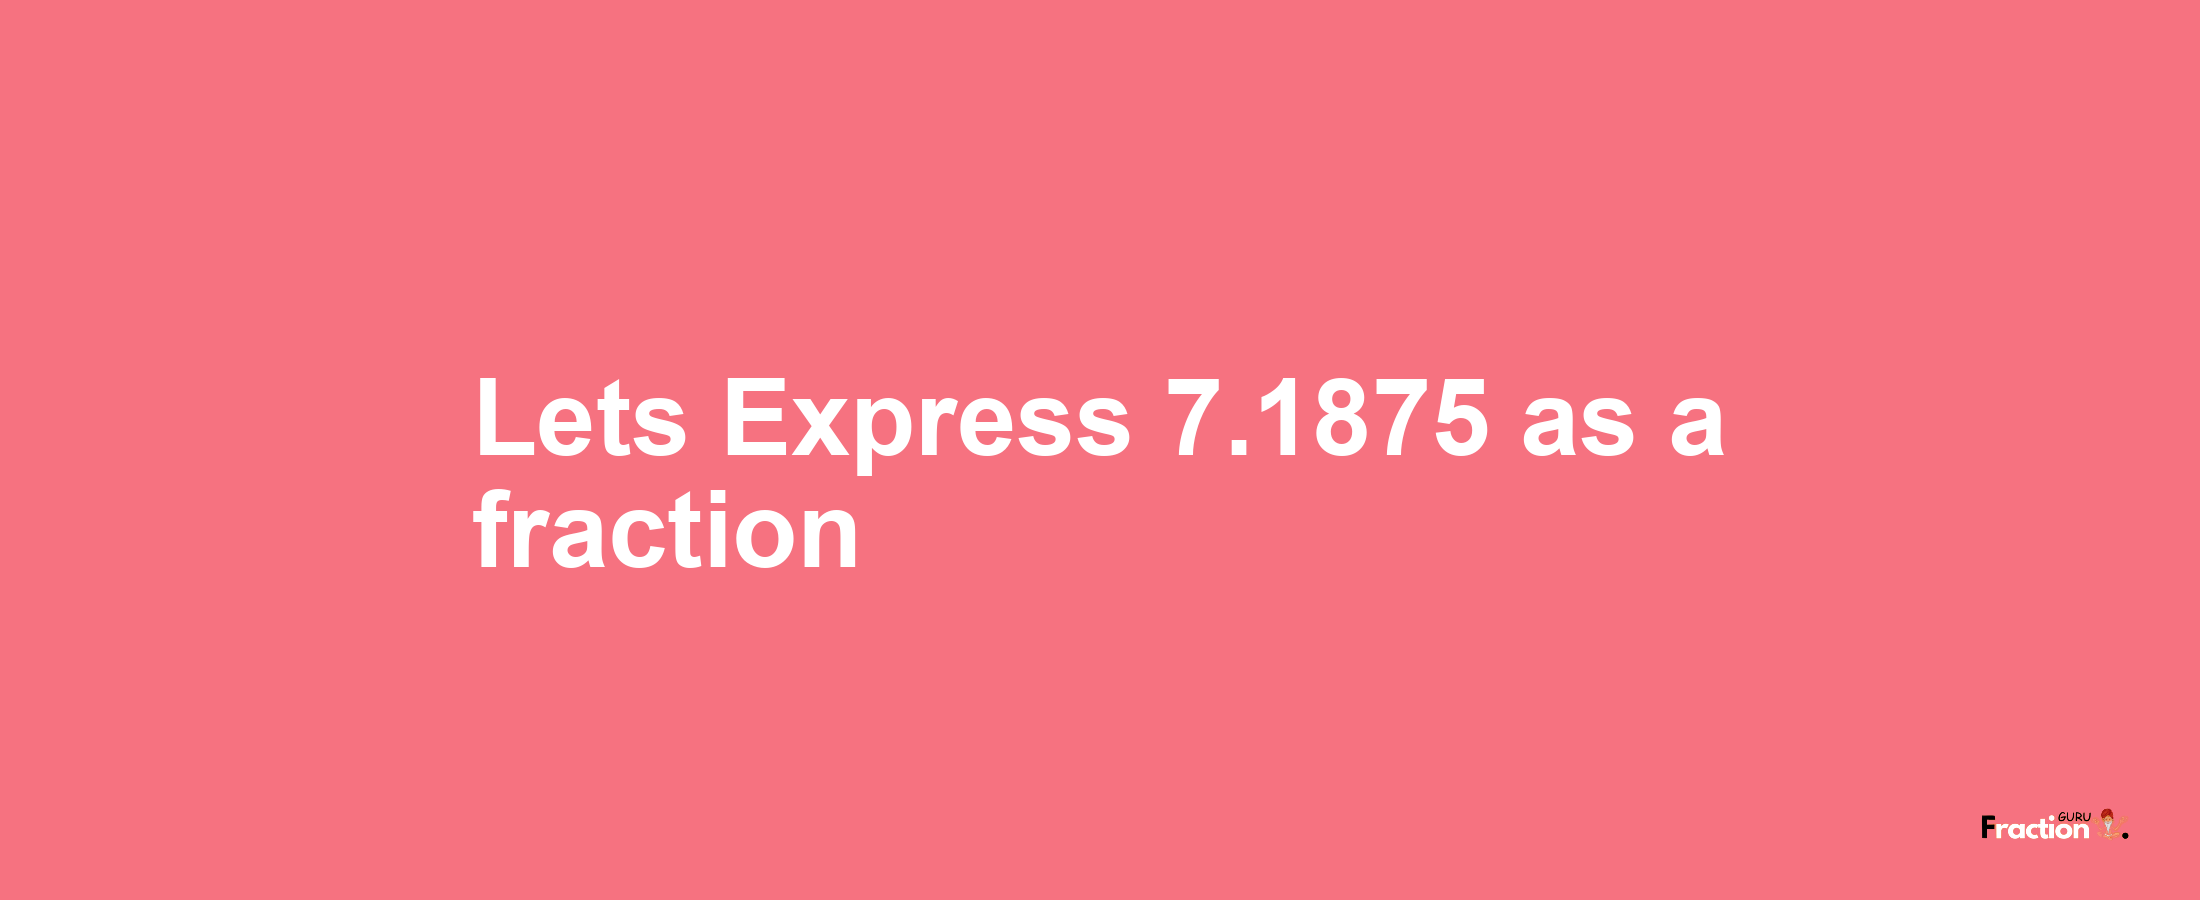 Lets Express 7.1875 as afraction